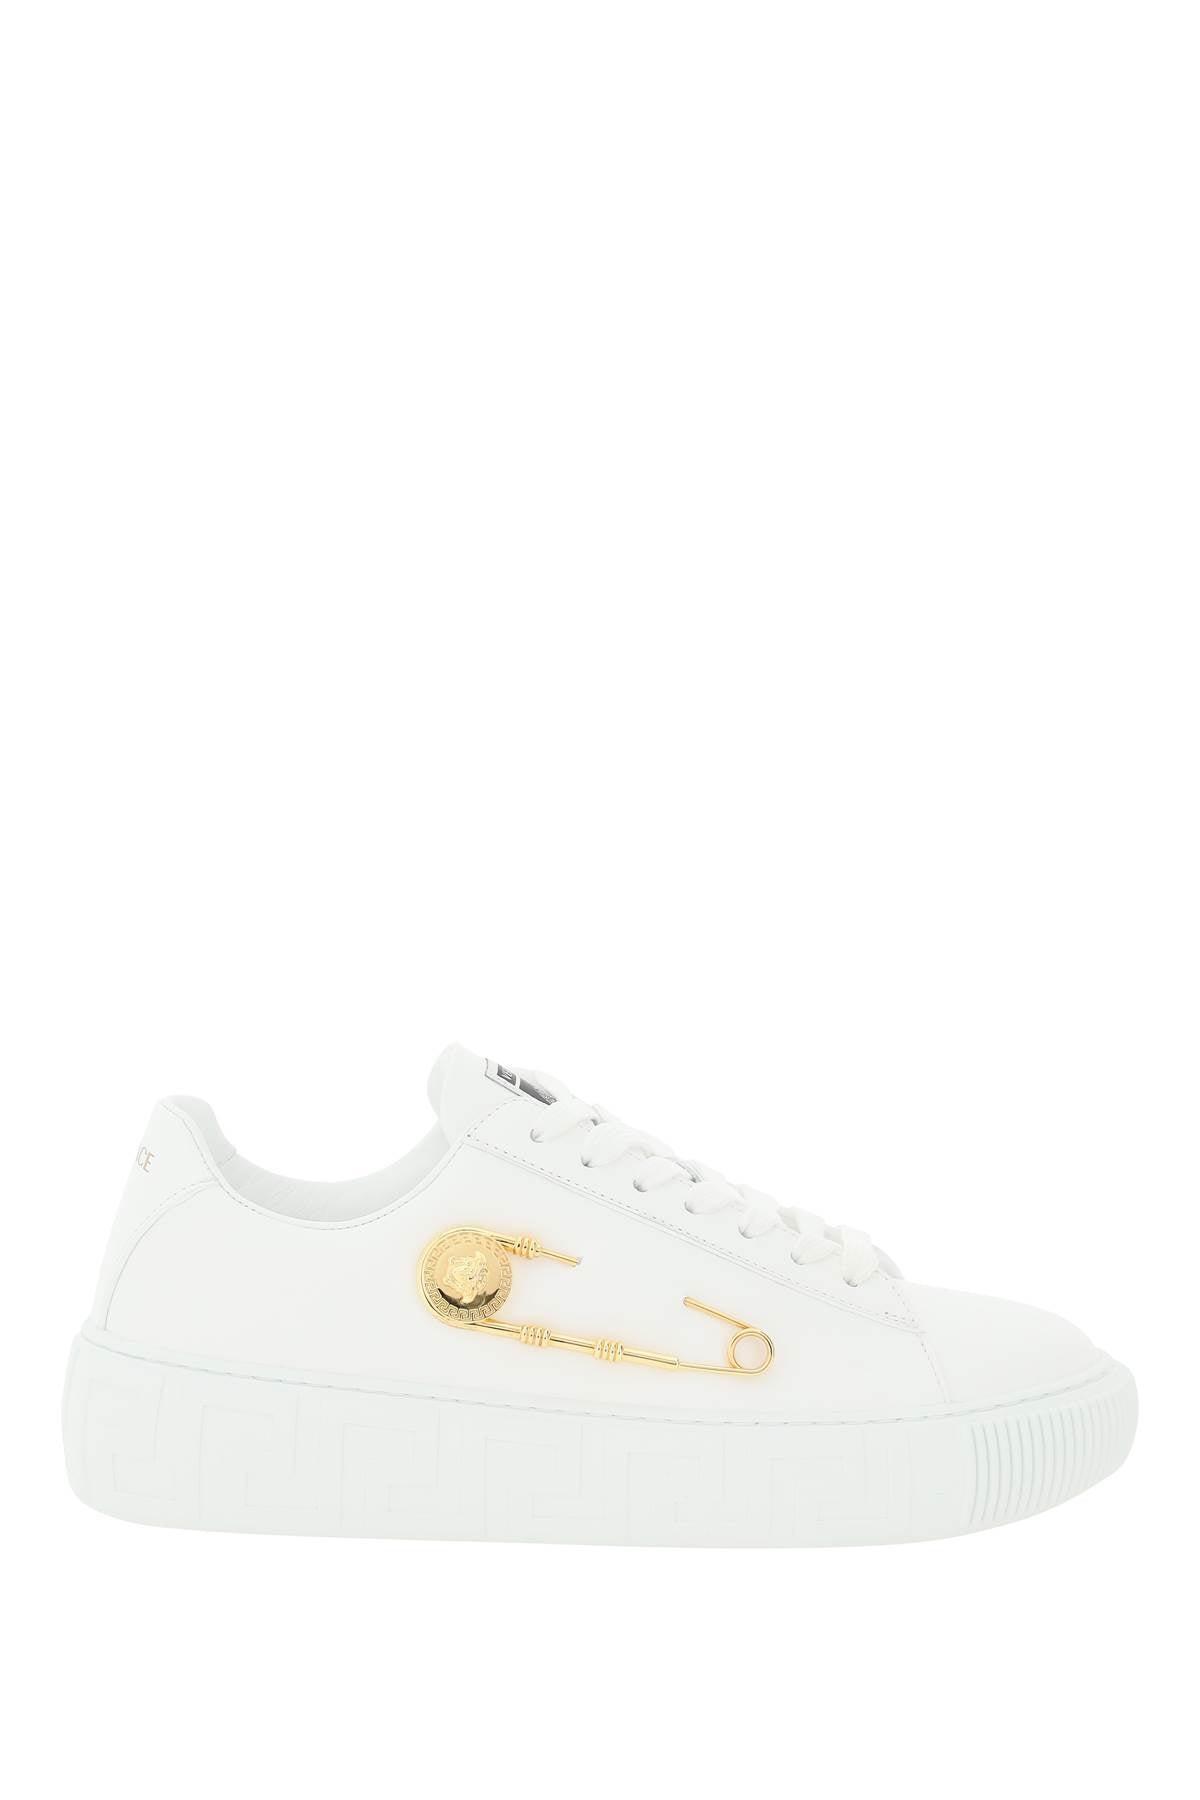 Versace Safety Pin Leather Sneakers in White | Lyst